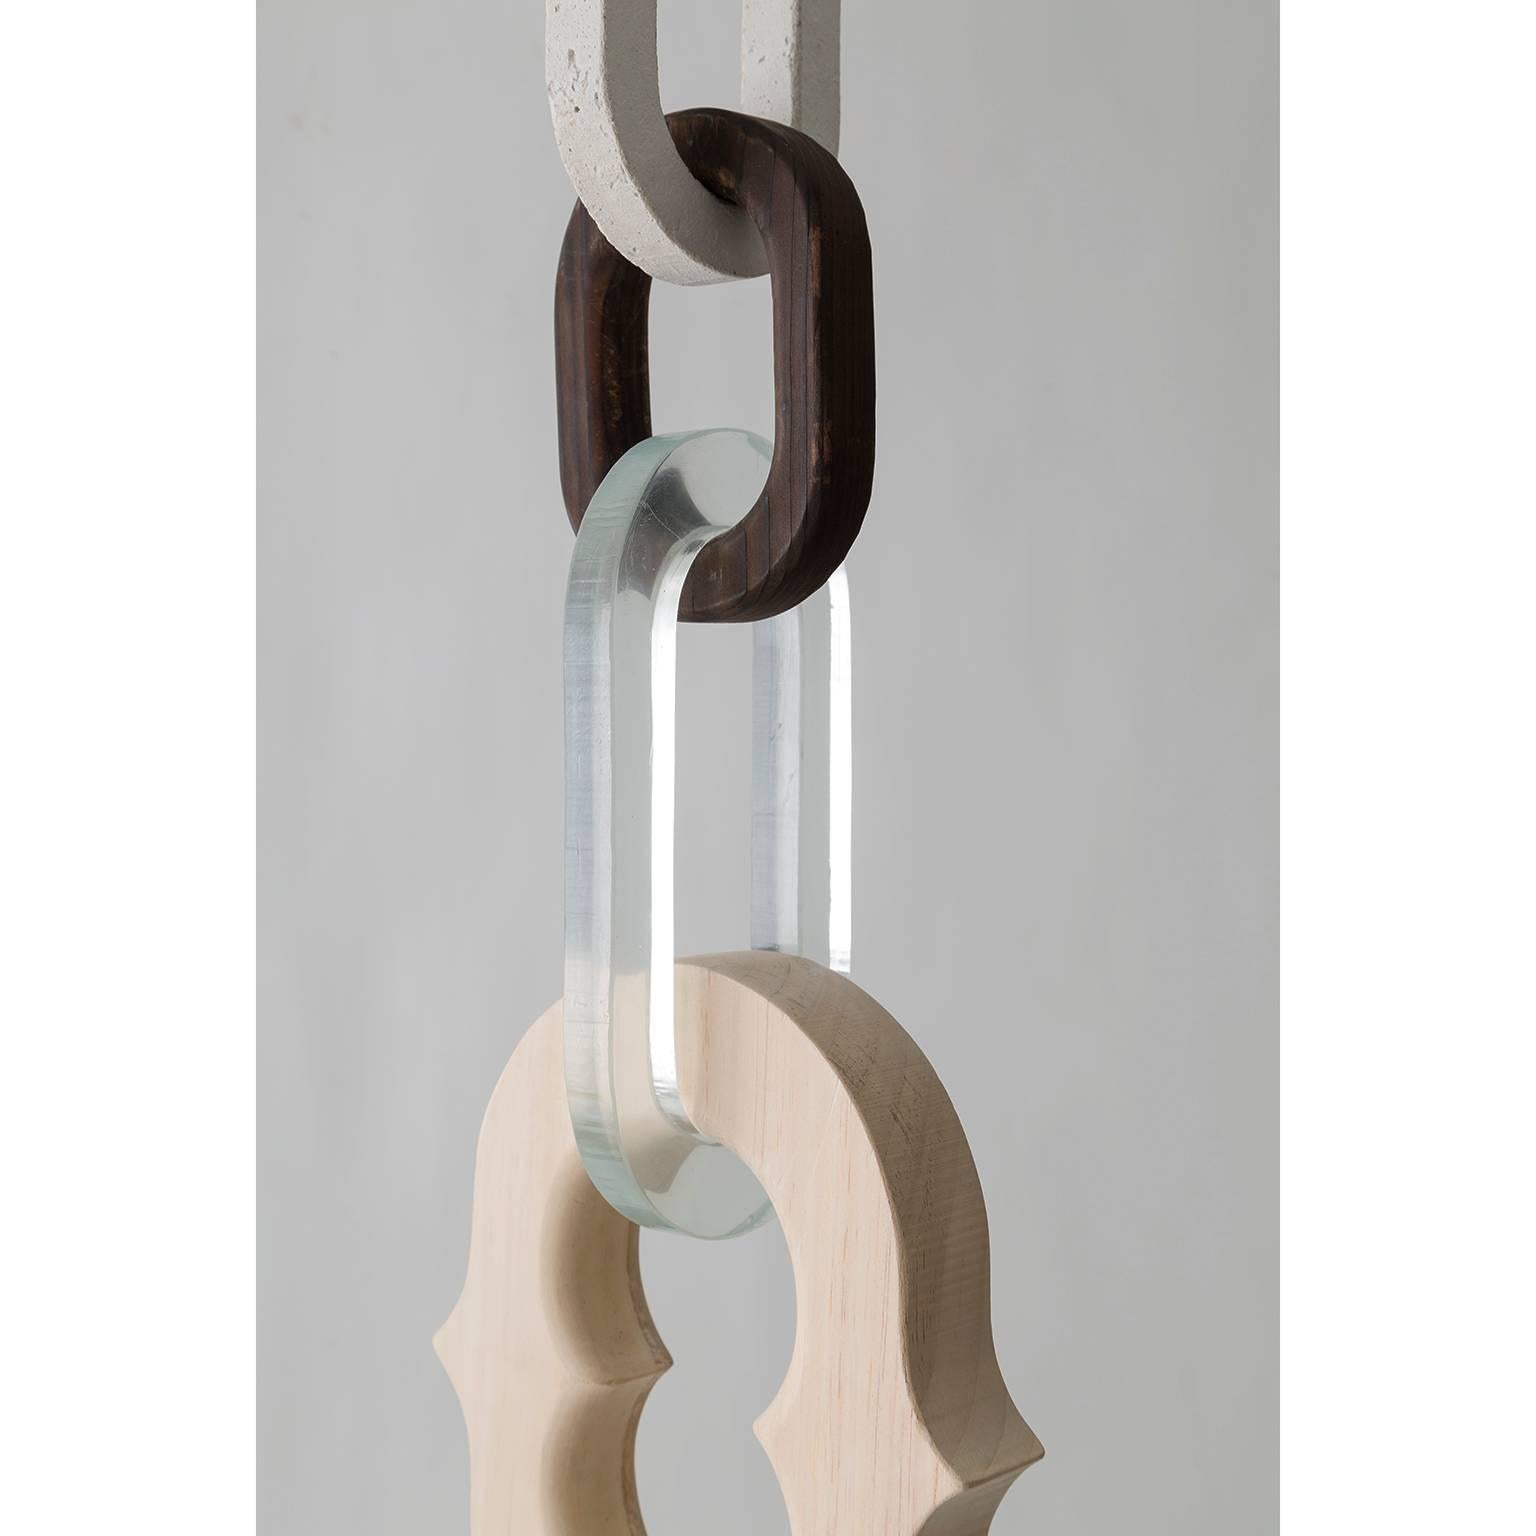 American Twelve Foot Long Hanging Chain Sculpture in Concrete, Resin and Wood - IN STOCK For Sale